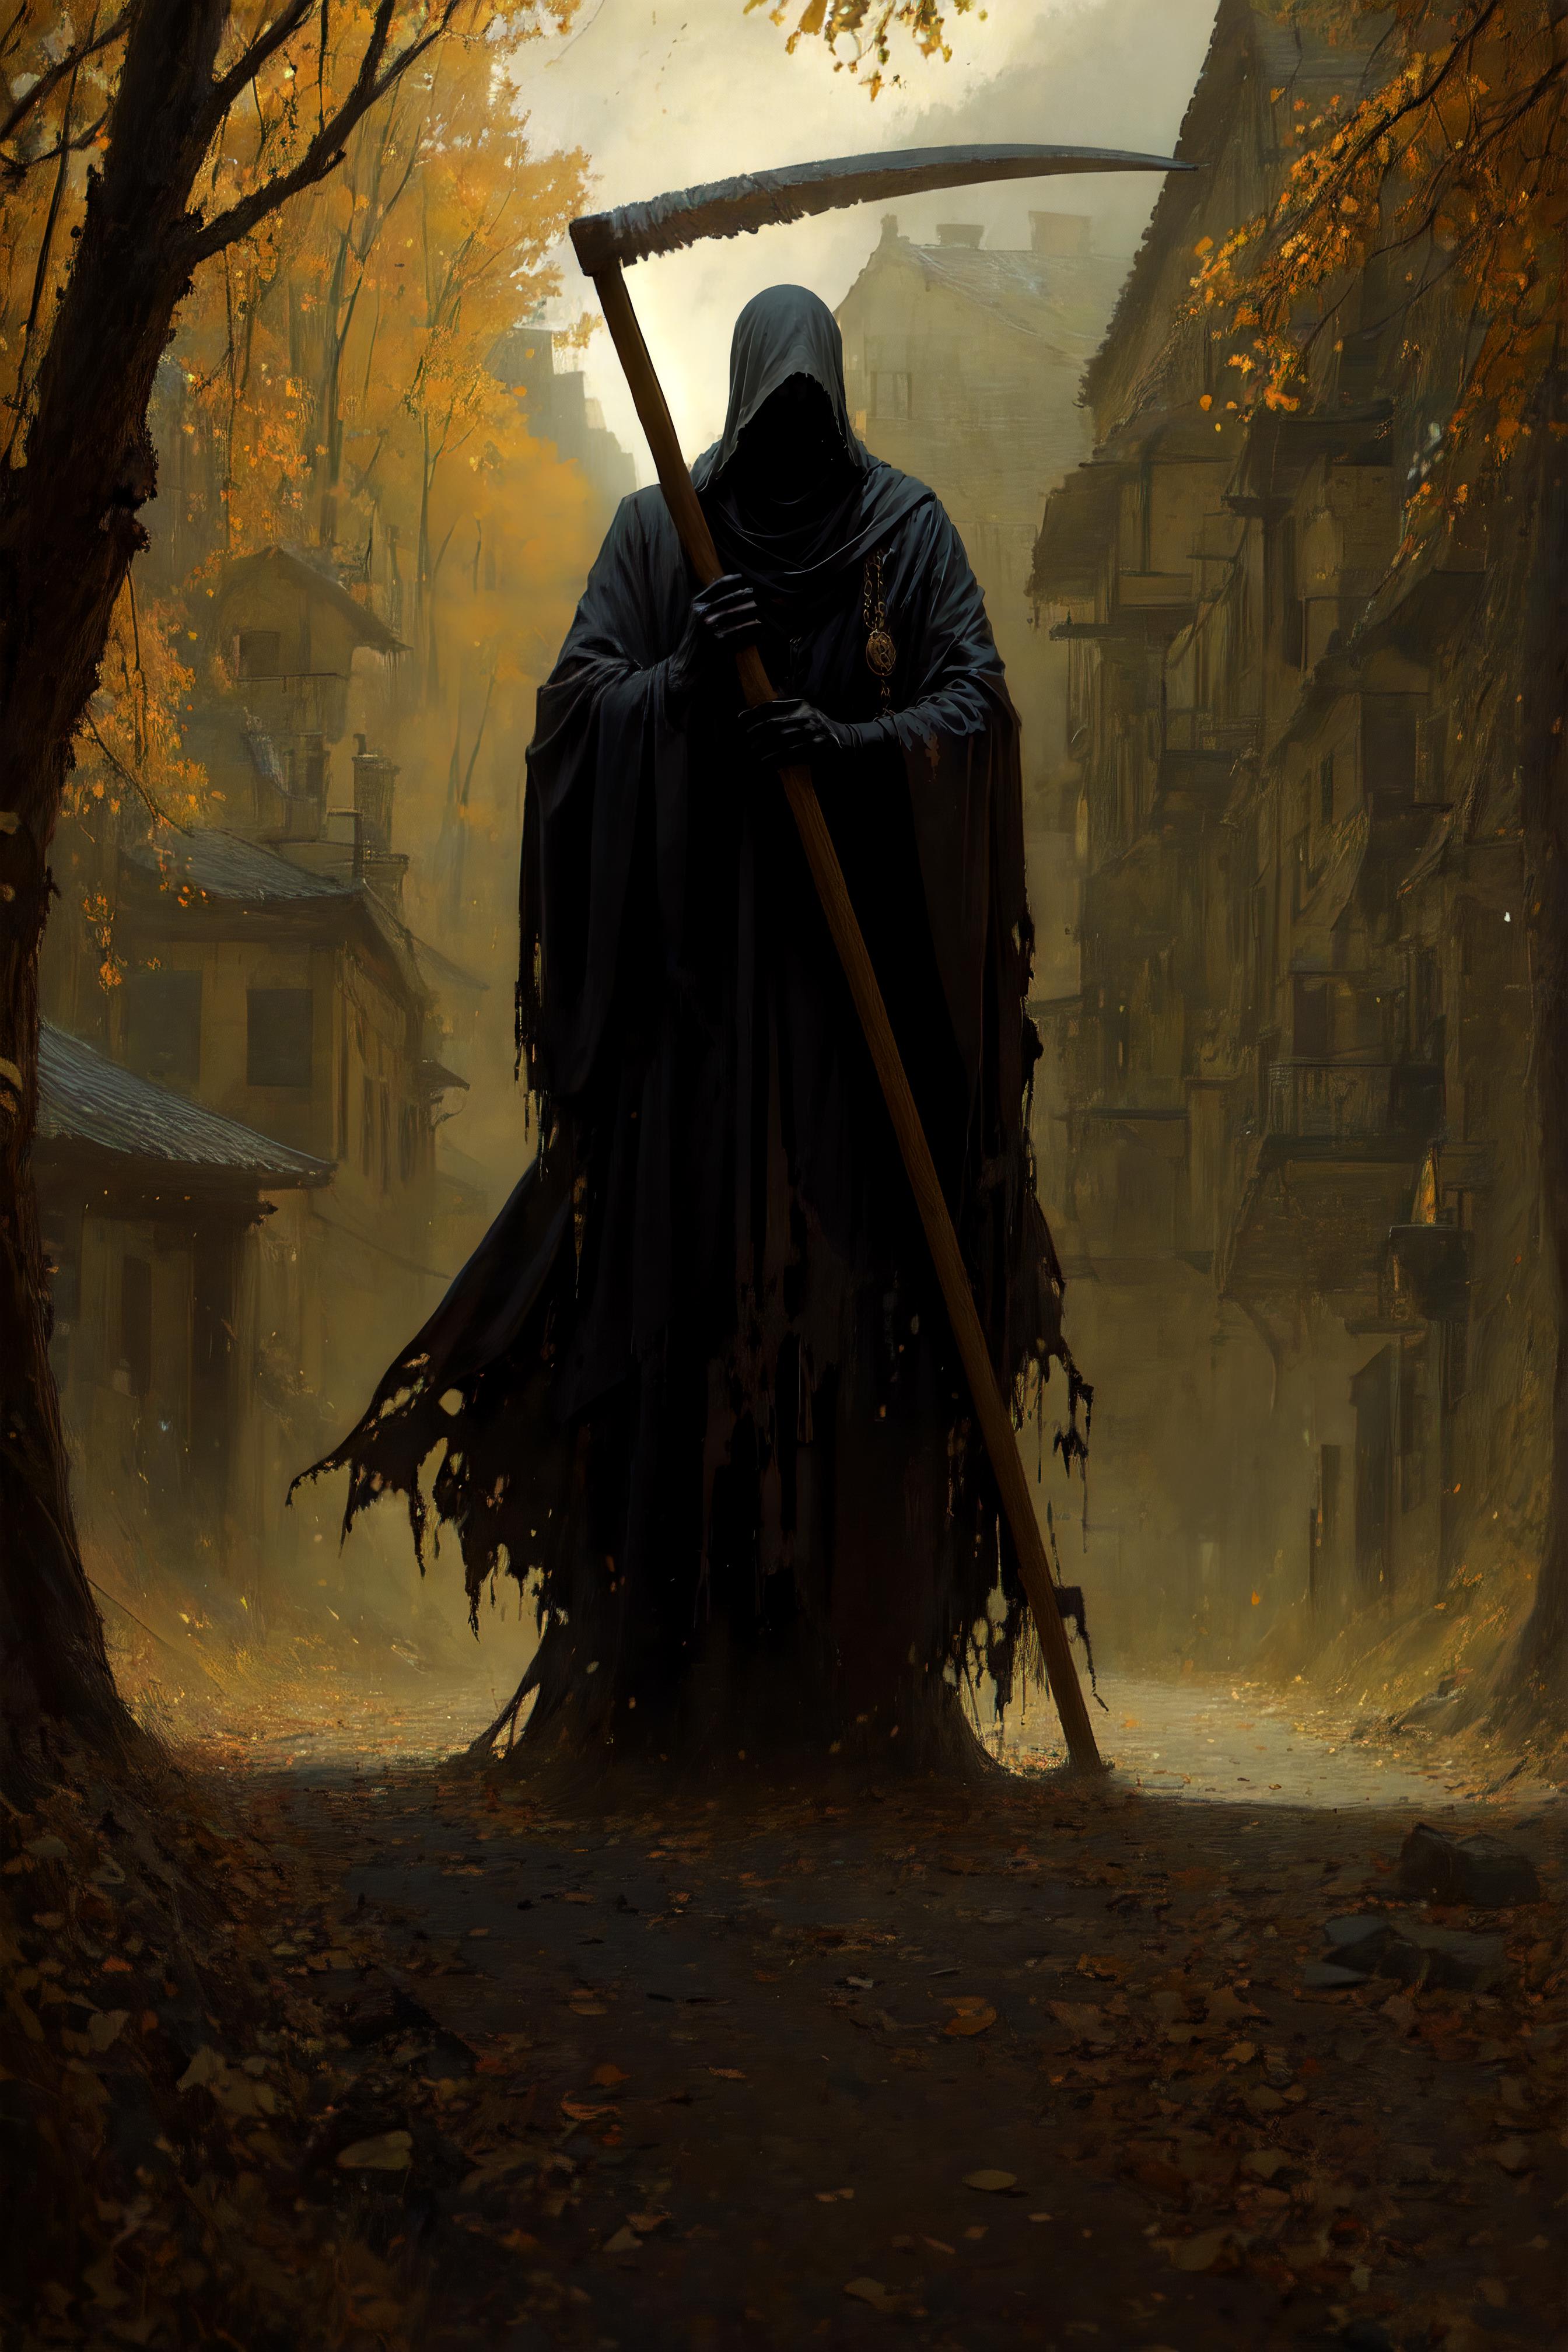 The Grim Reaper: A Dark and Mysterious Figure in a Gothic Setting